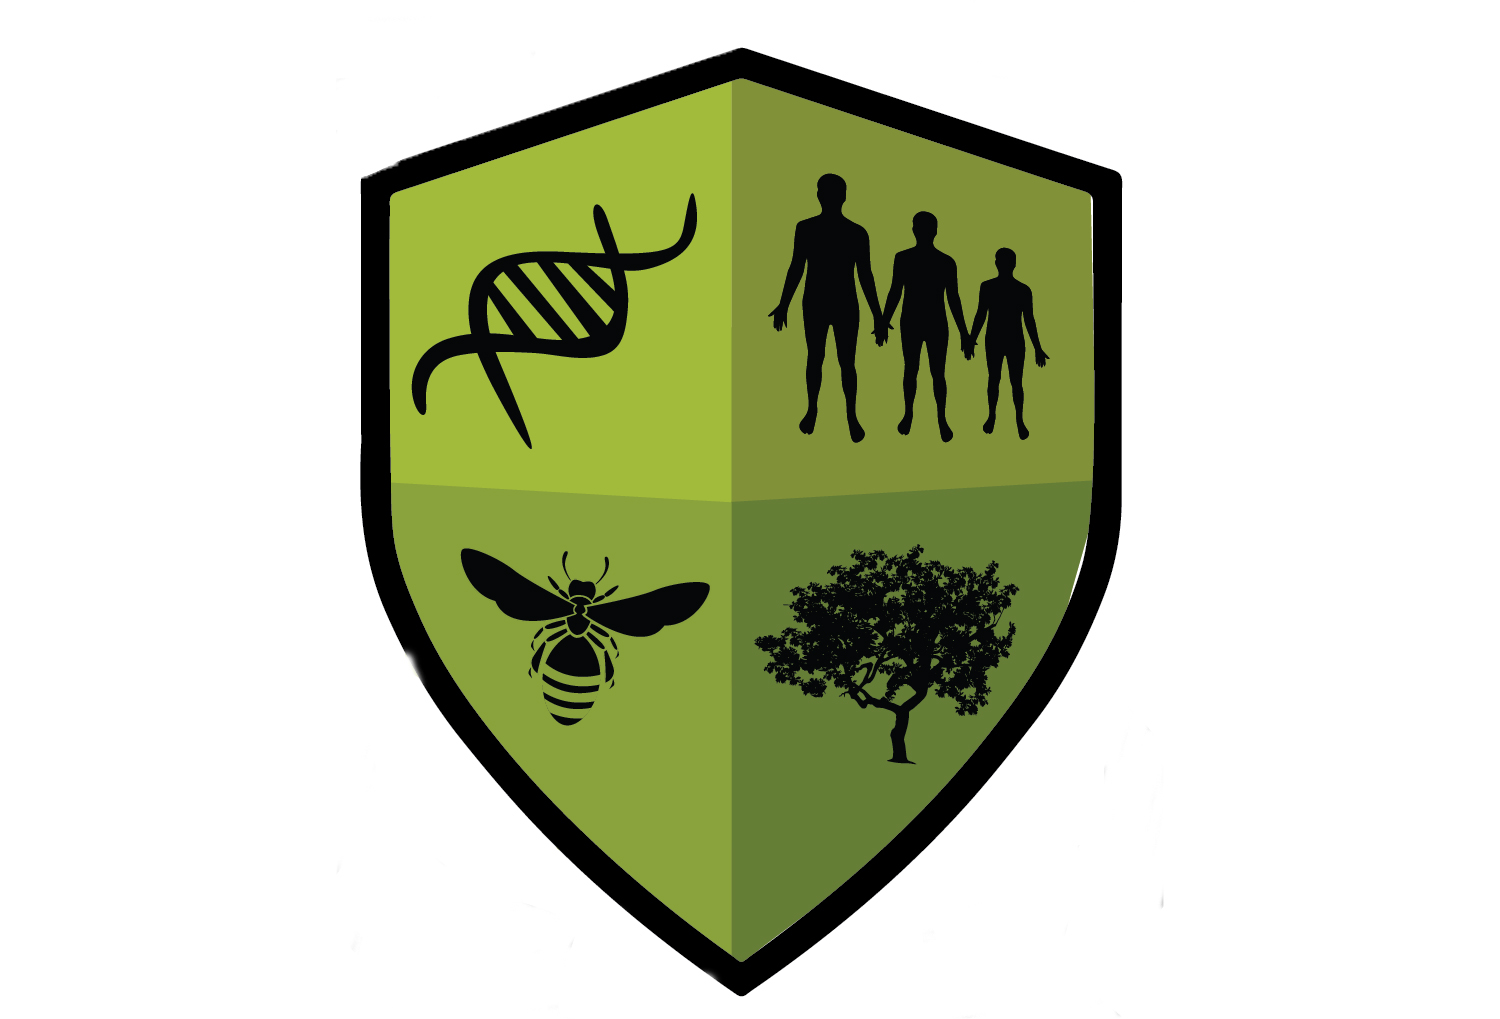 Seal with DNA double helix, people, tree, and bees on it